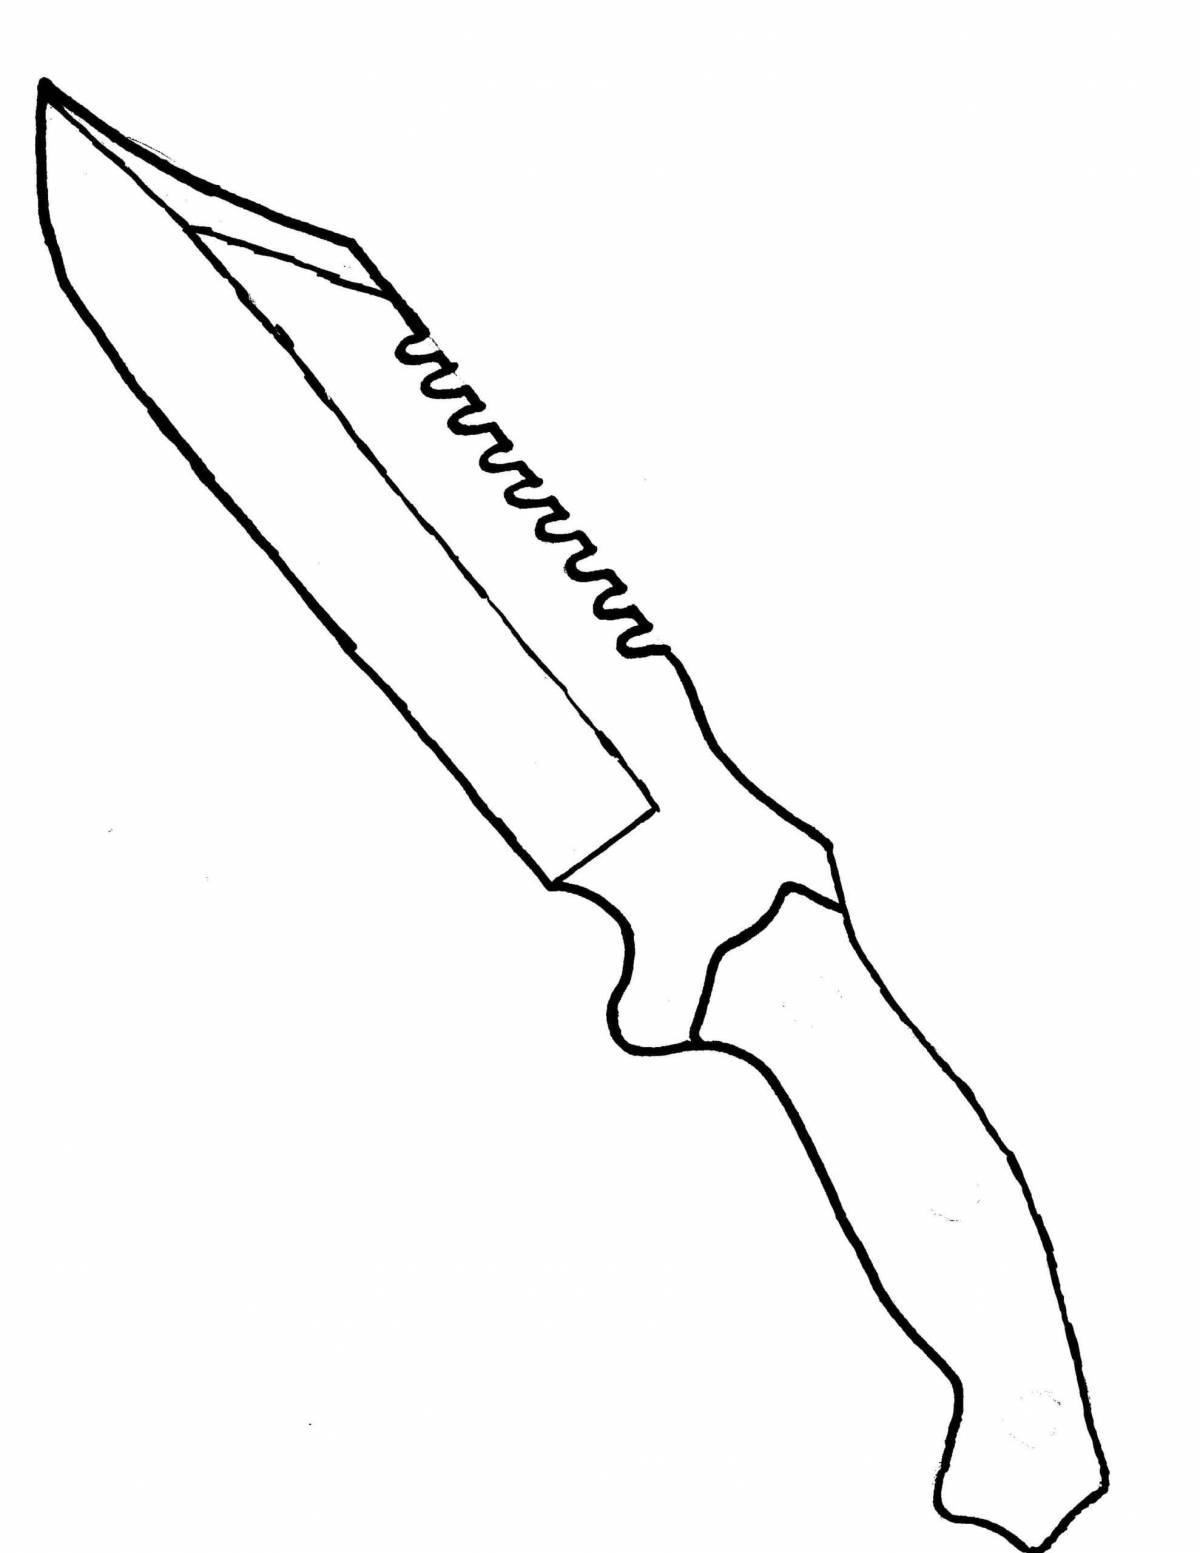 Coloring book playful knife